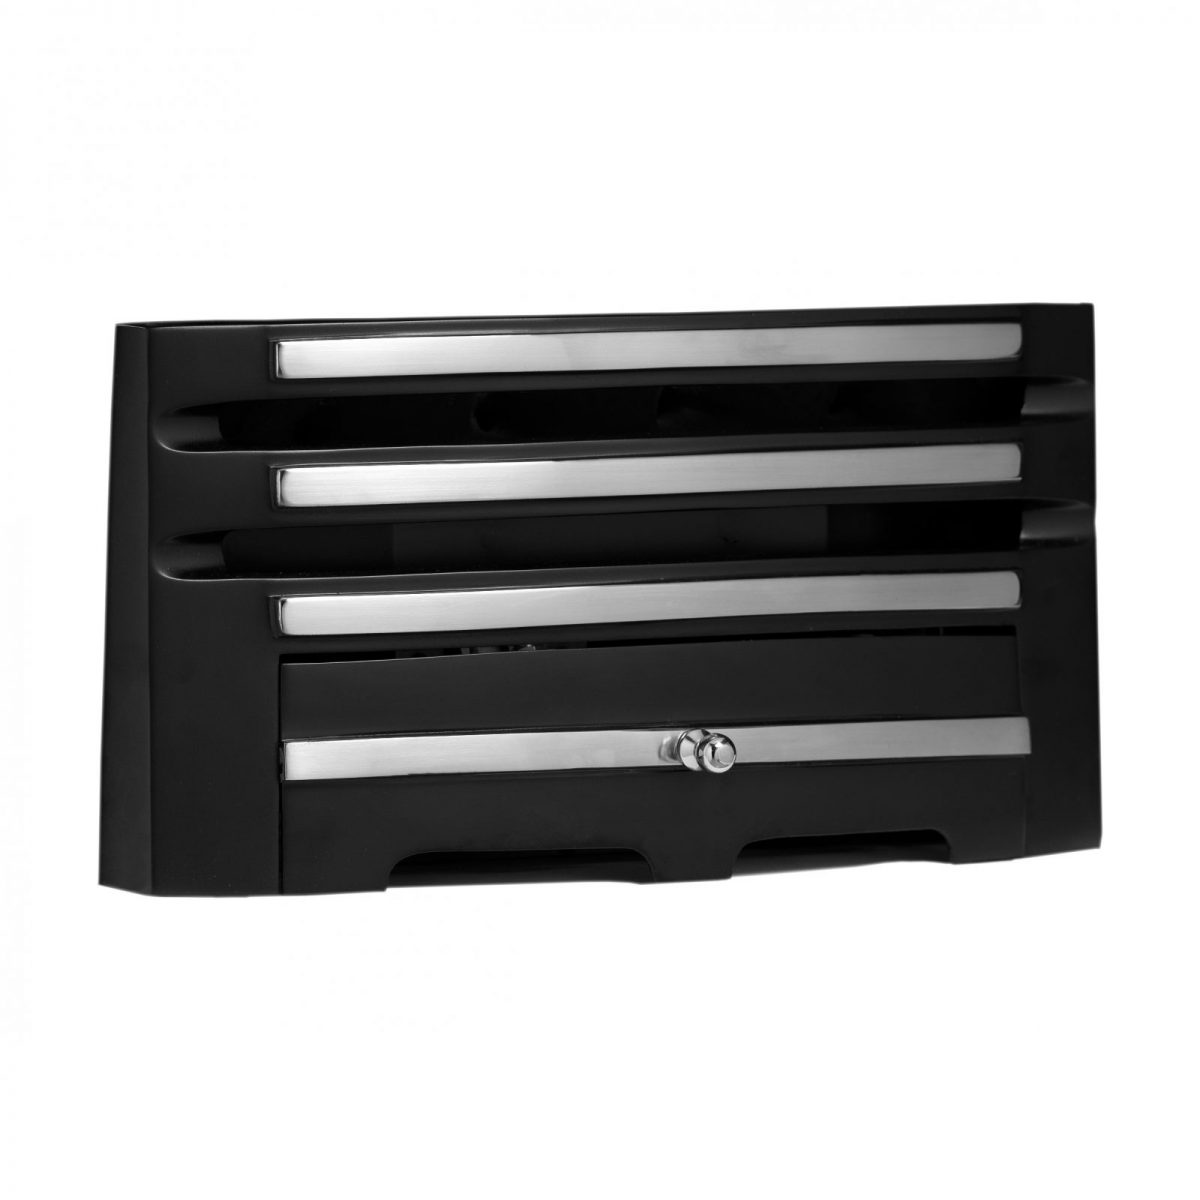 Axton Fret in Chrome & Black  – Compatible with the Be Modern Classic gas Fire Range